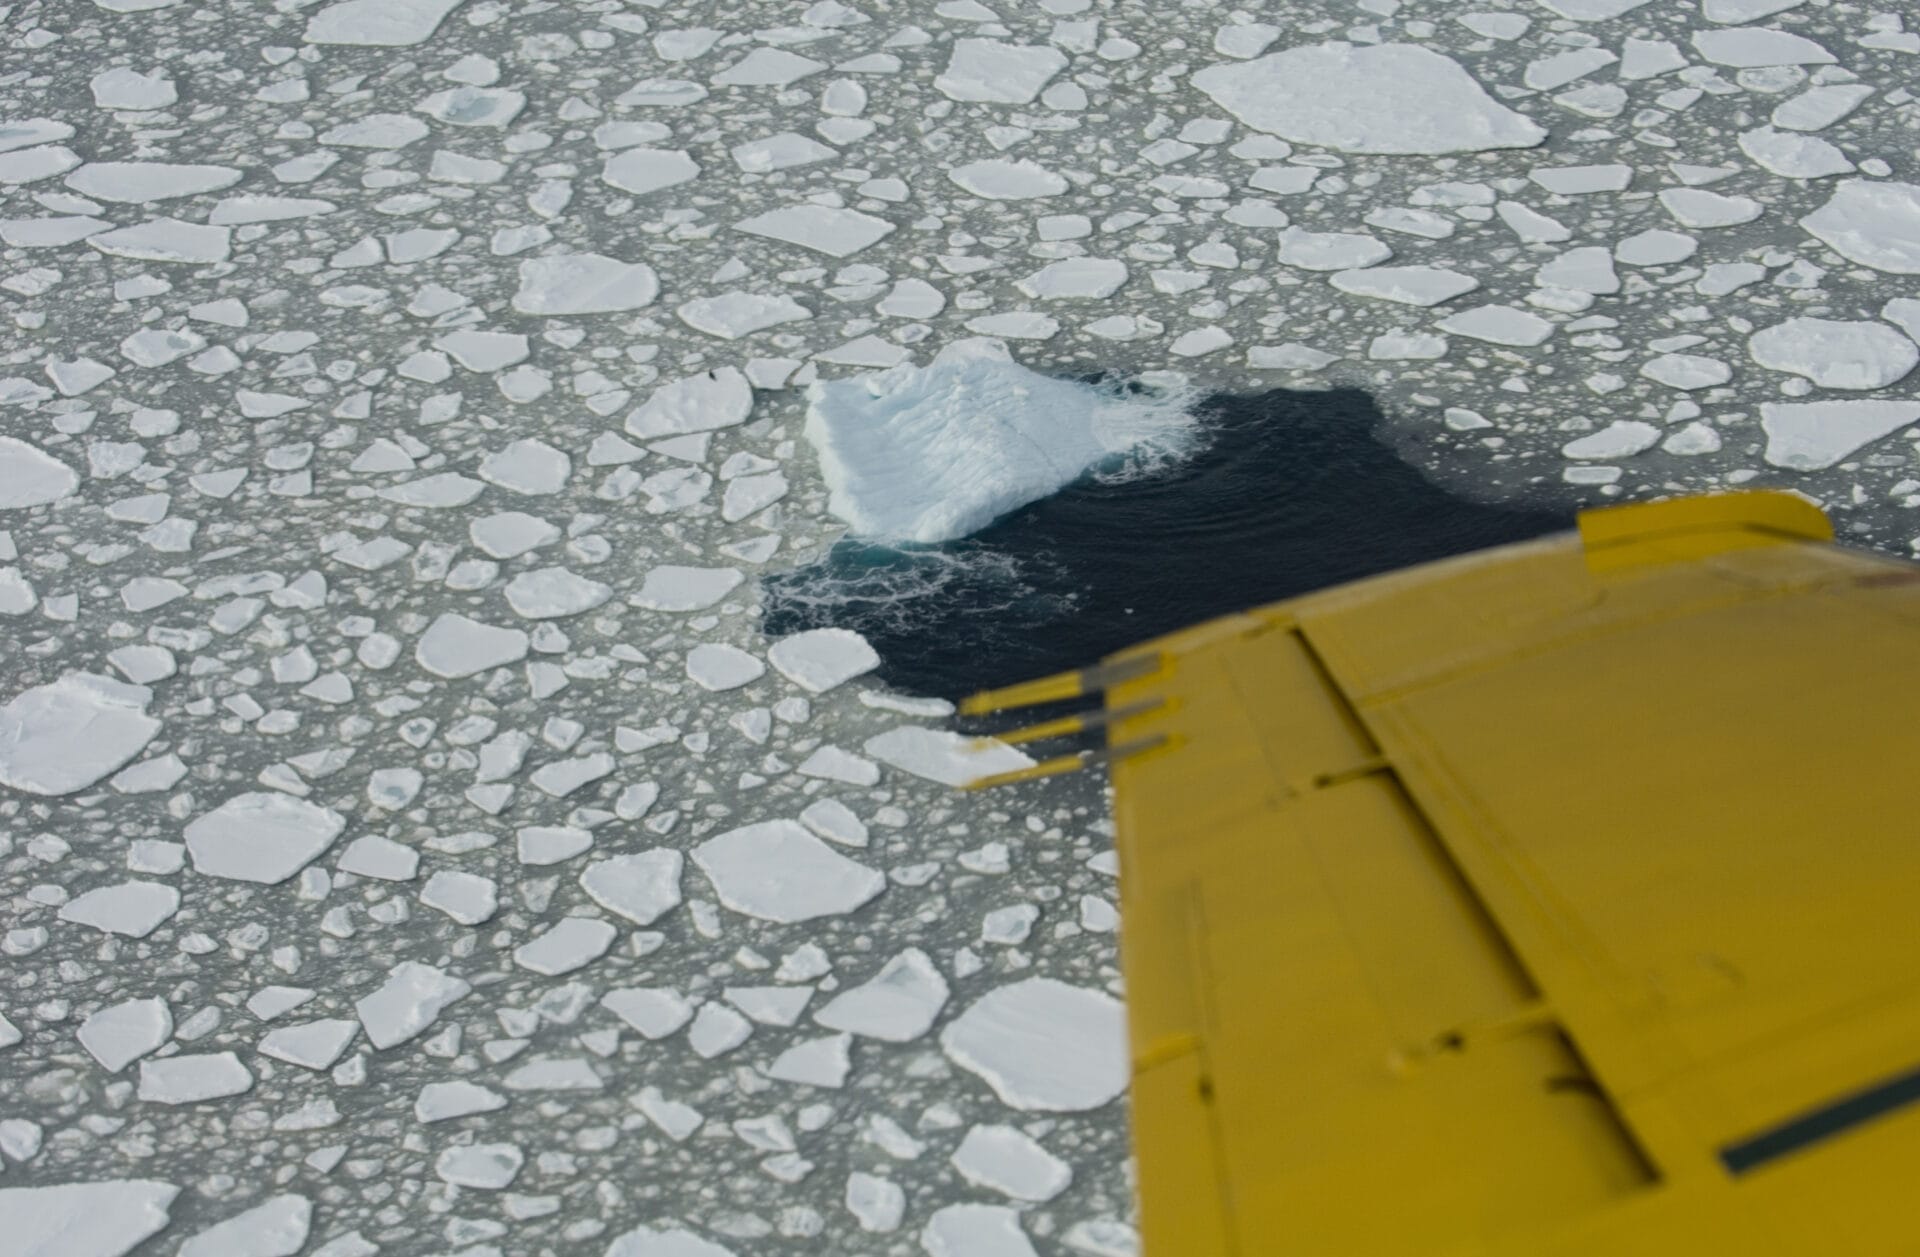 Ice pans in the Atlantic ocean viewed from an aircraft flying over them. The wing of the aircraft is visible.